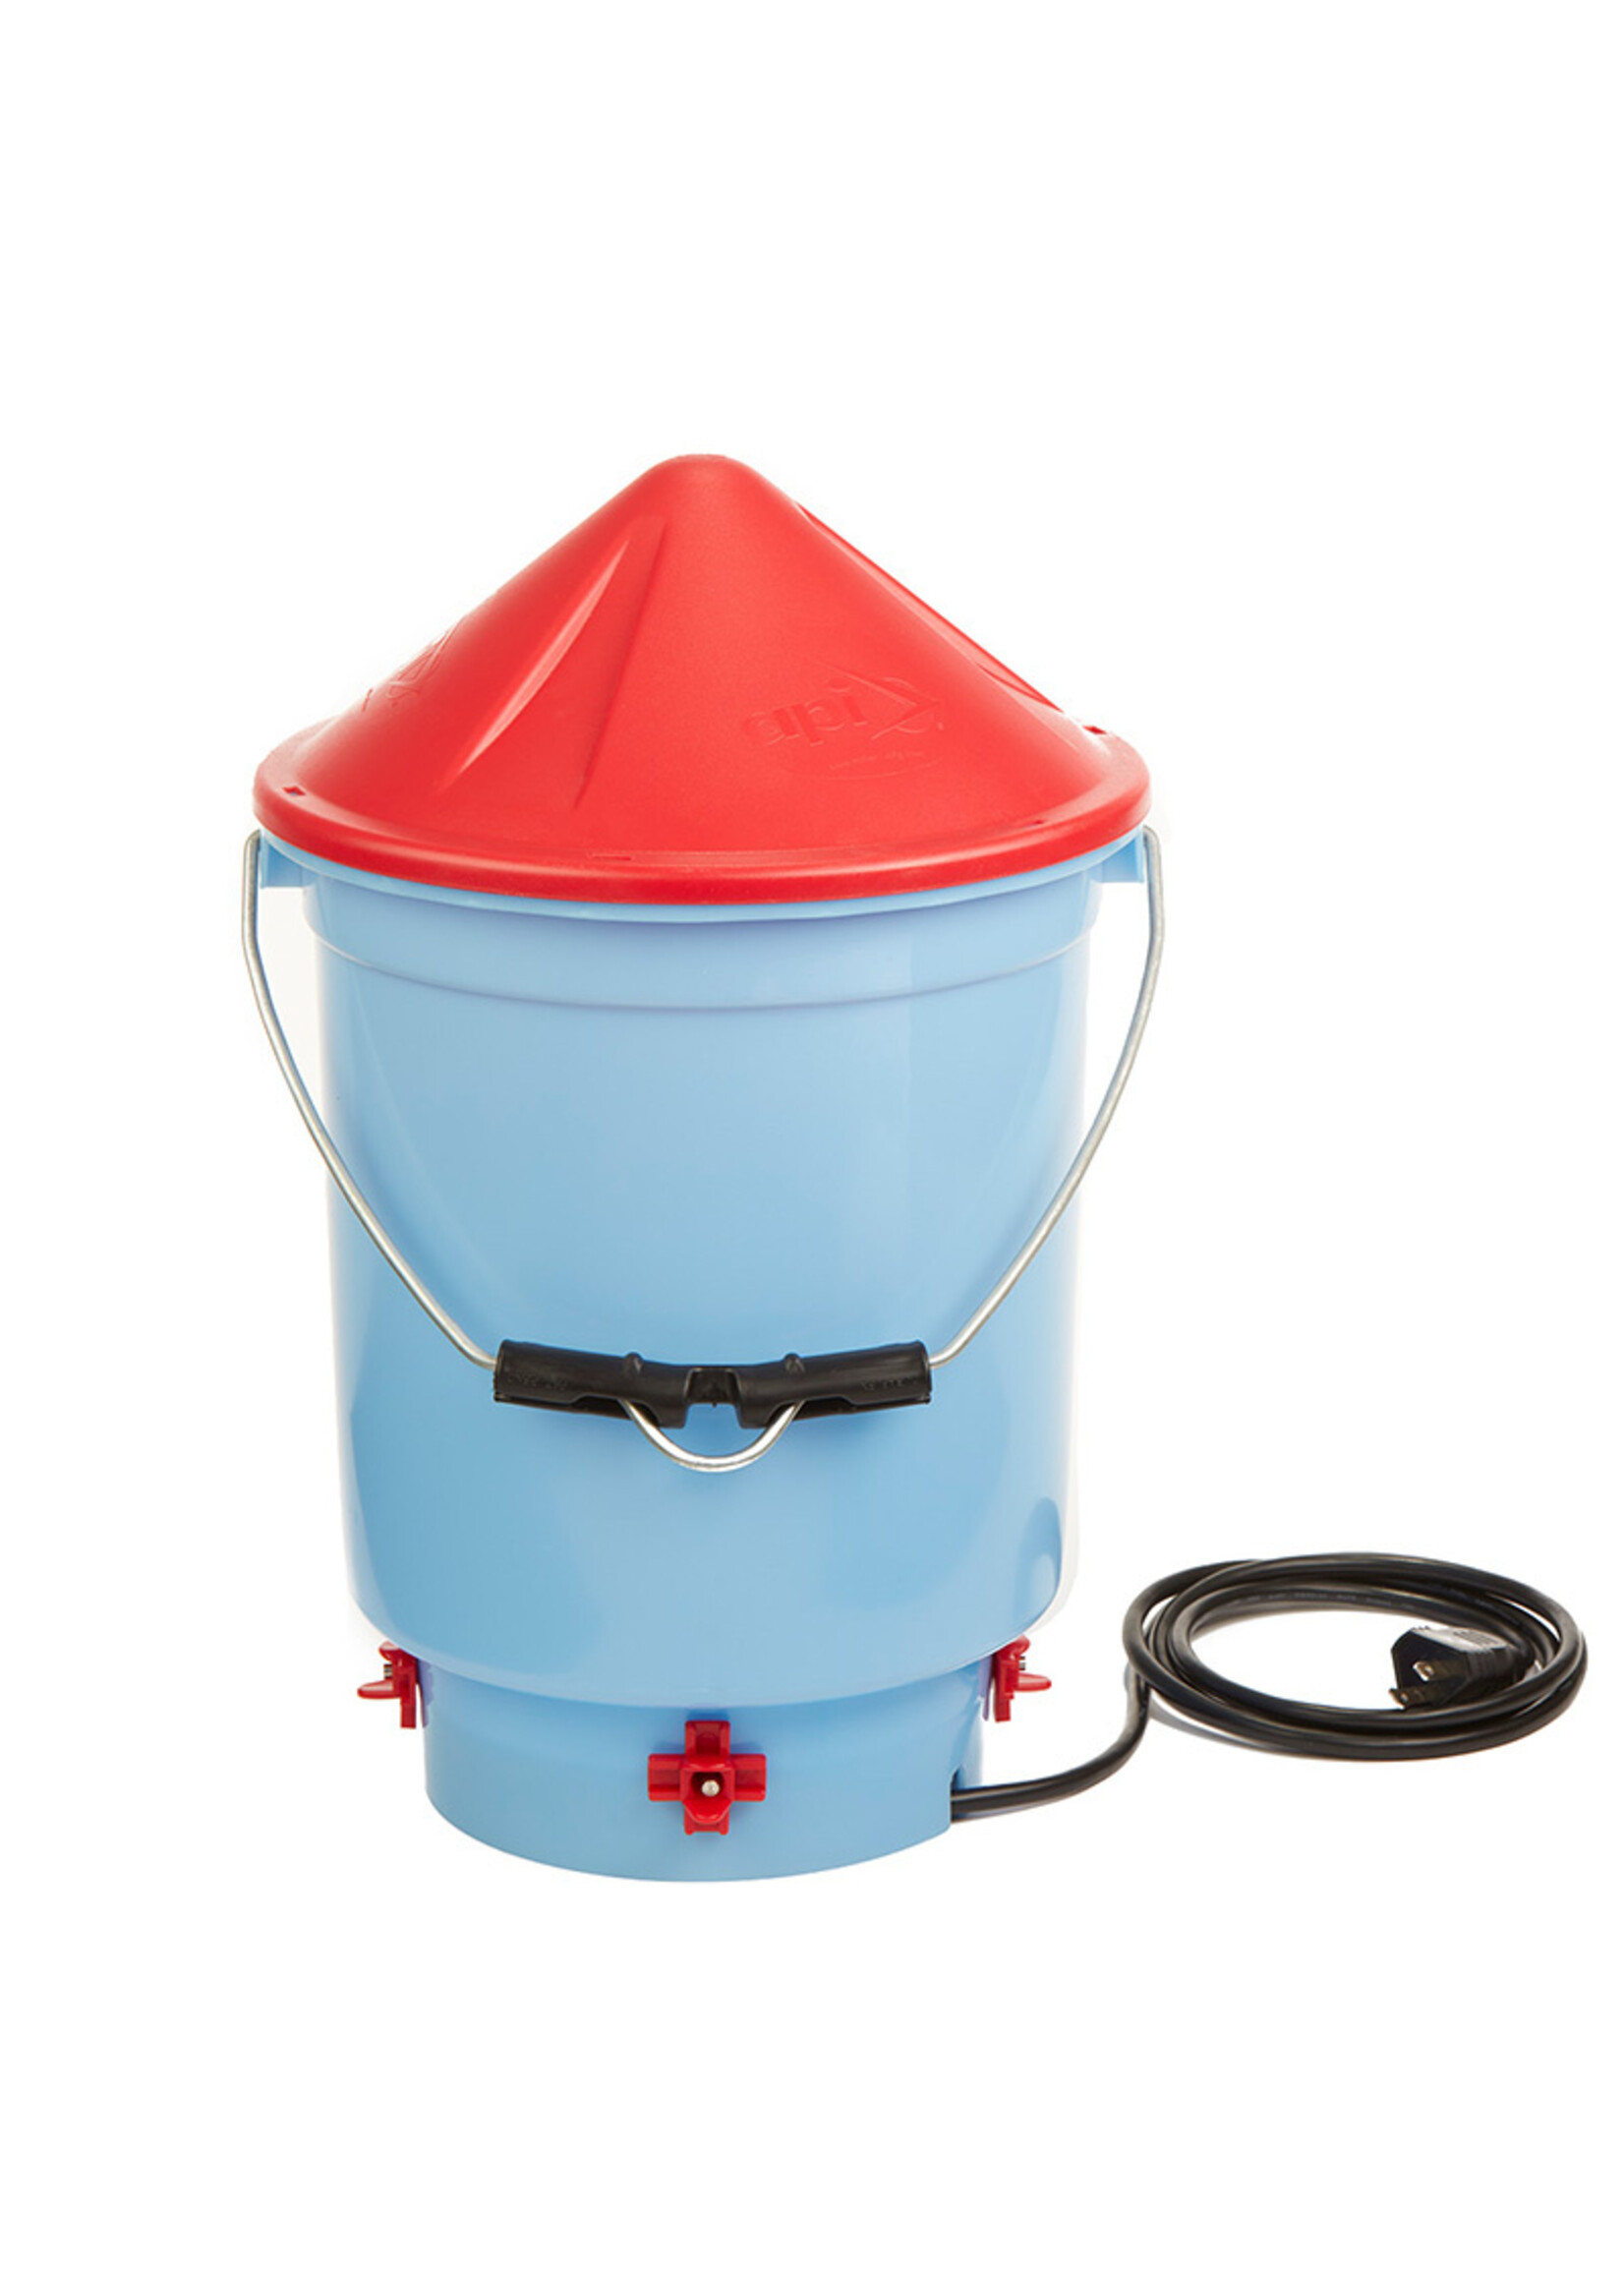 api Poultry Waterer - Heated Hen Hydrator - 3 Gallons